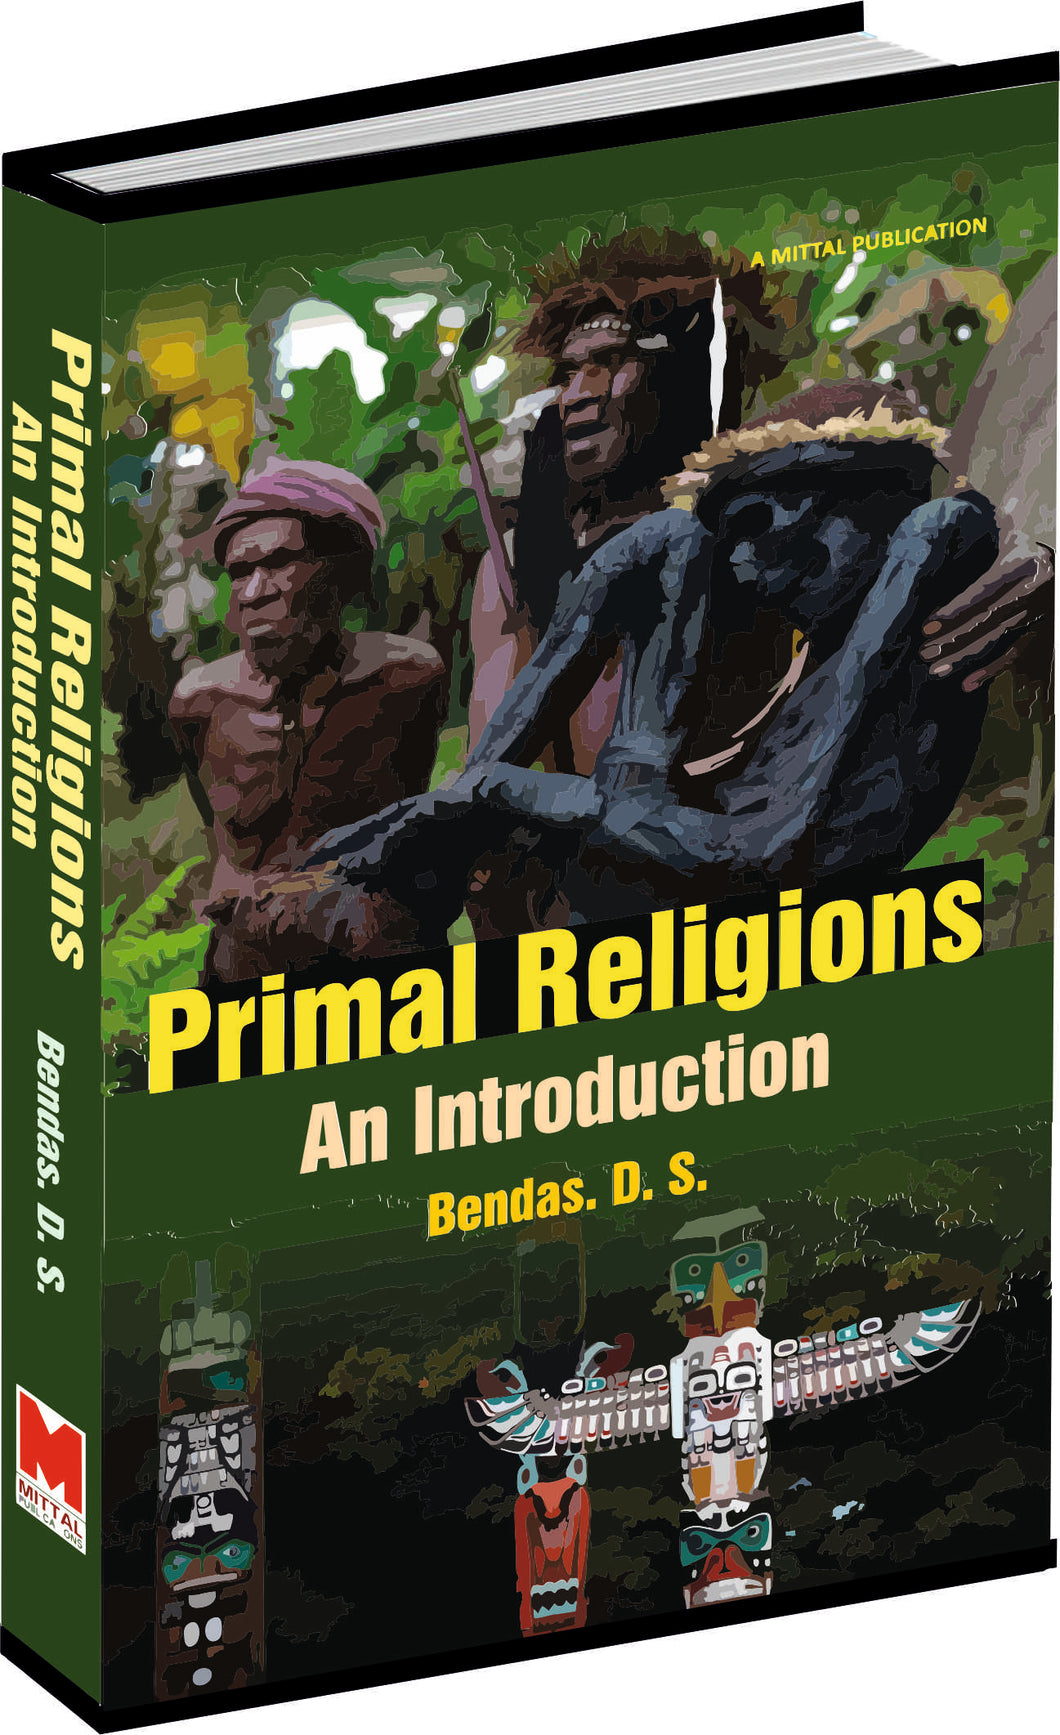 Primal Religions: An Introduction by Bendas D.S.